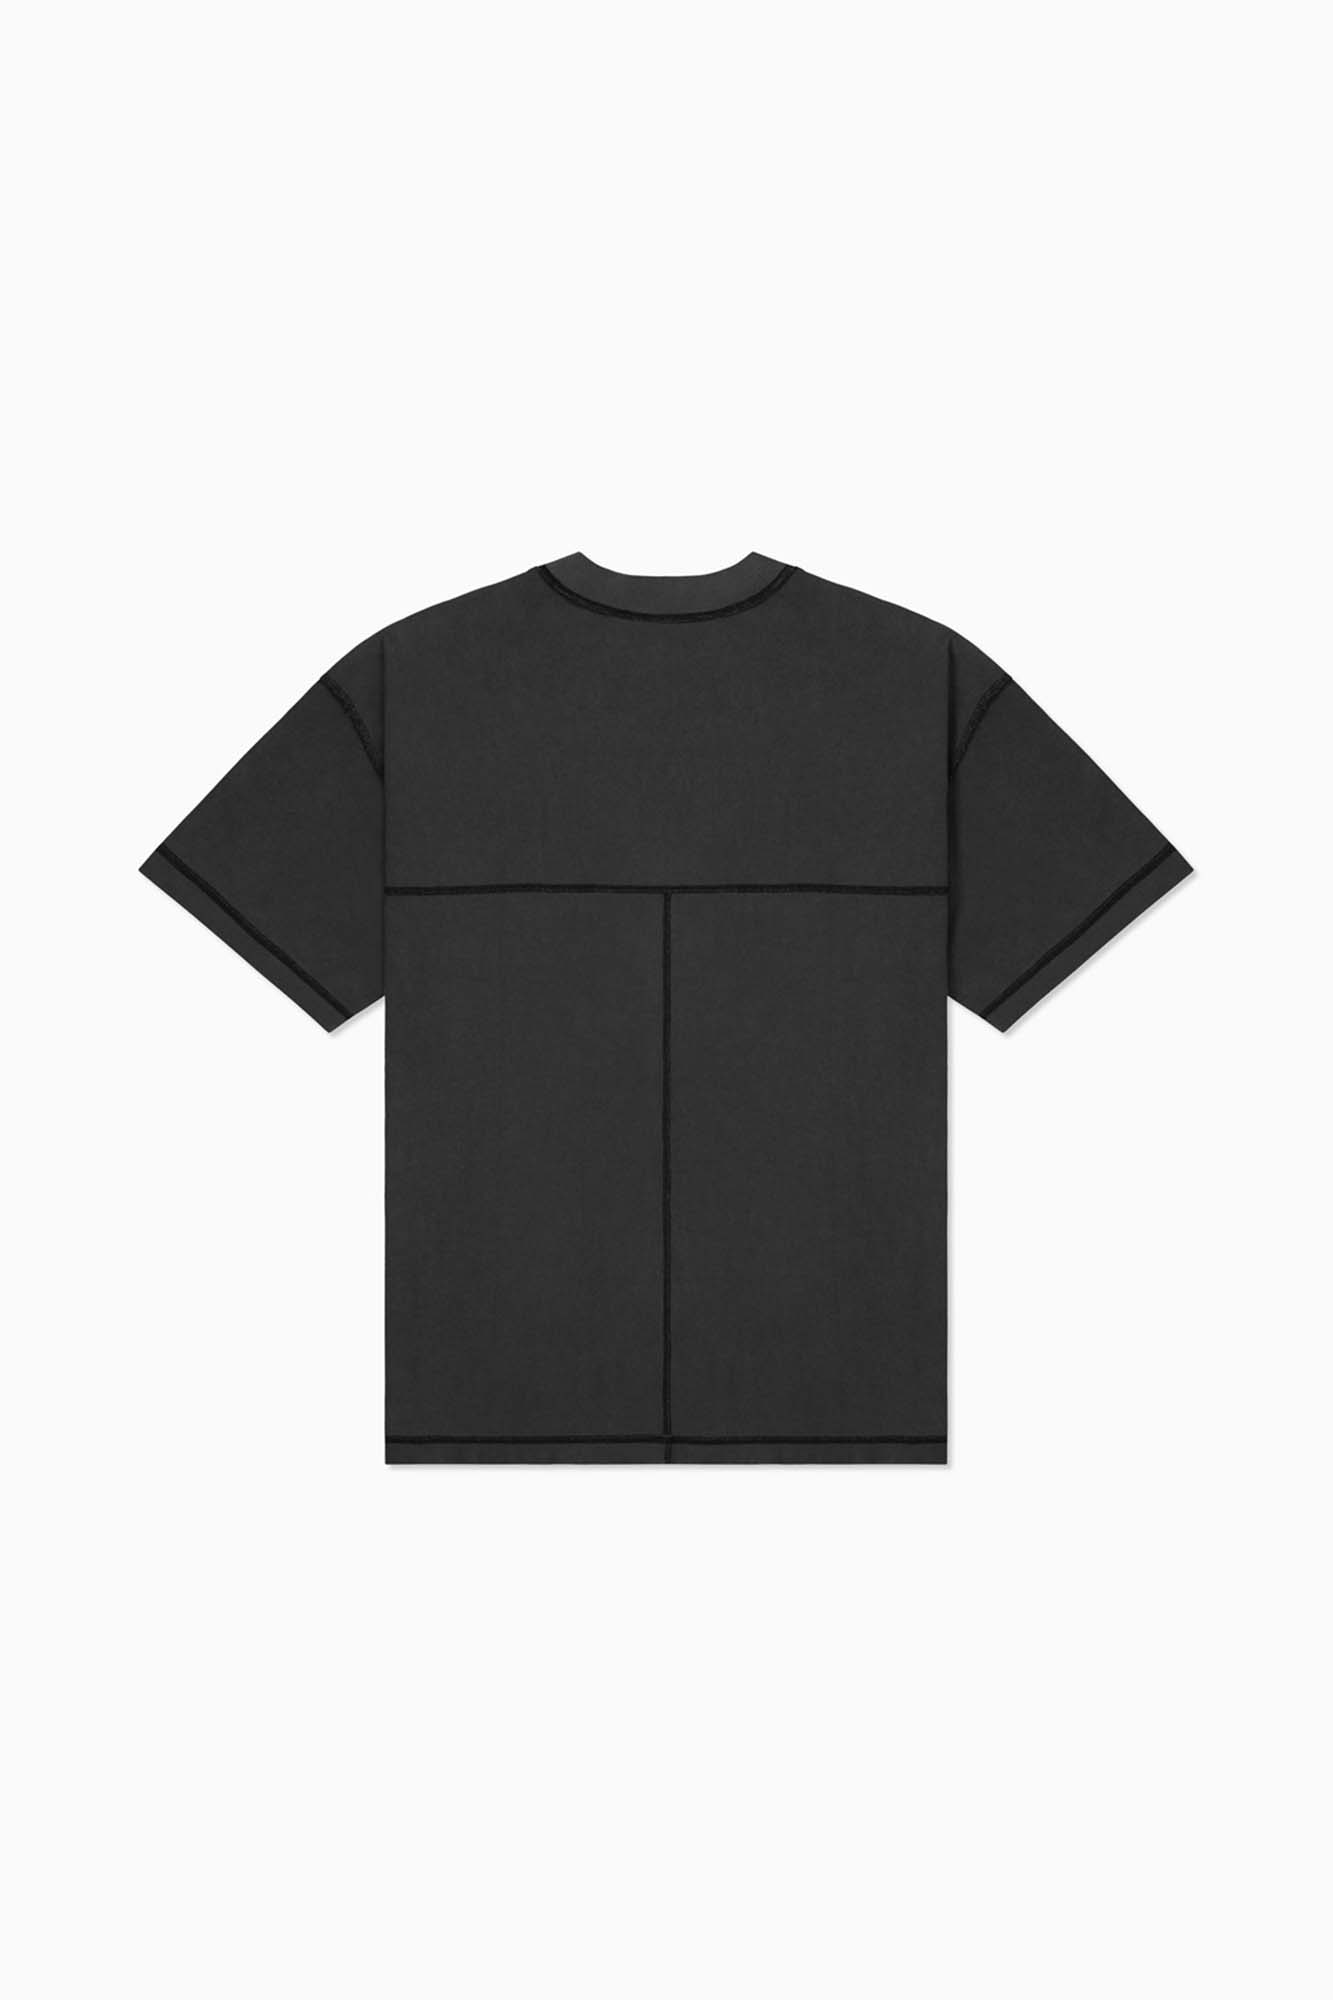 Inside out Tee - Charcoal